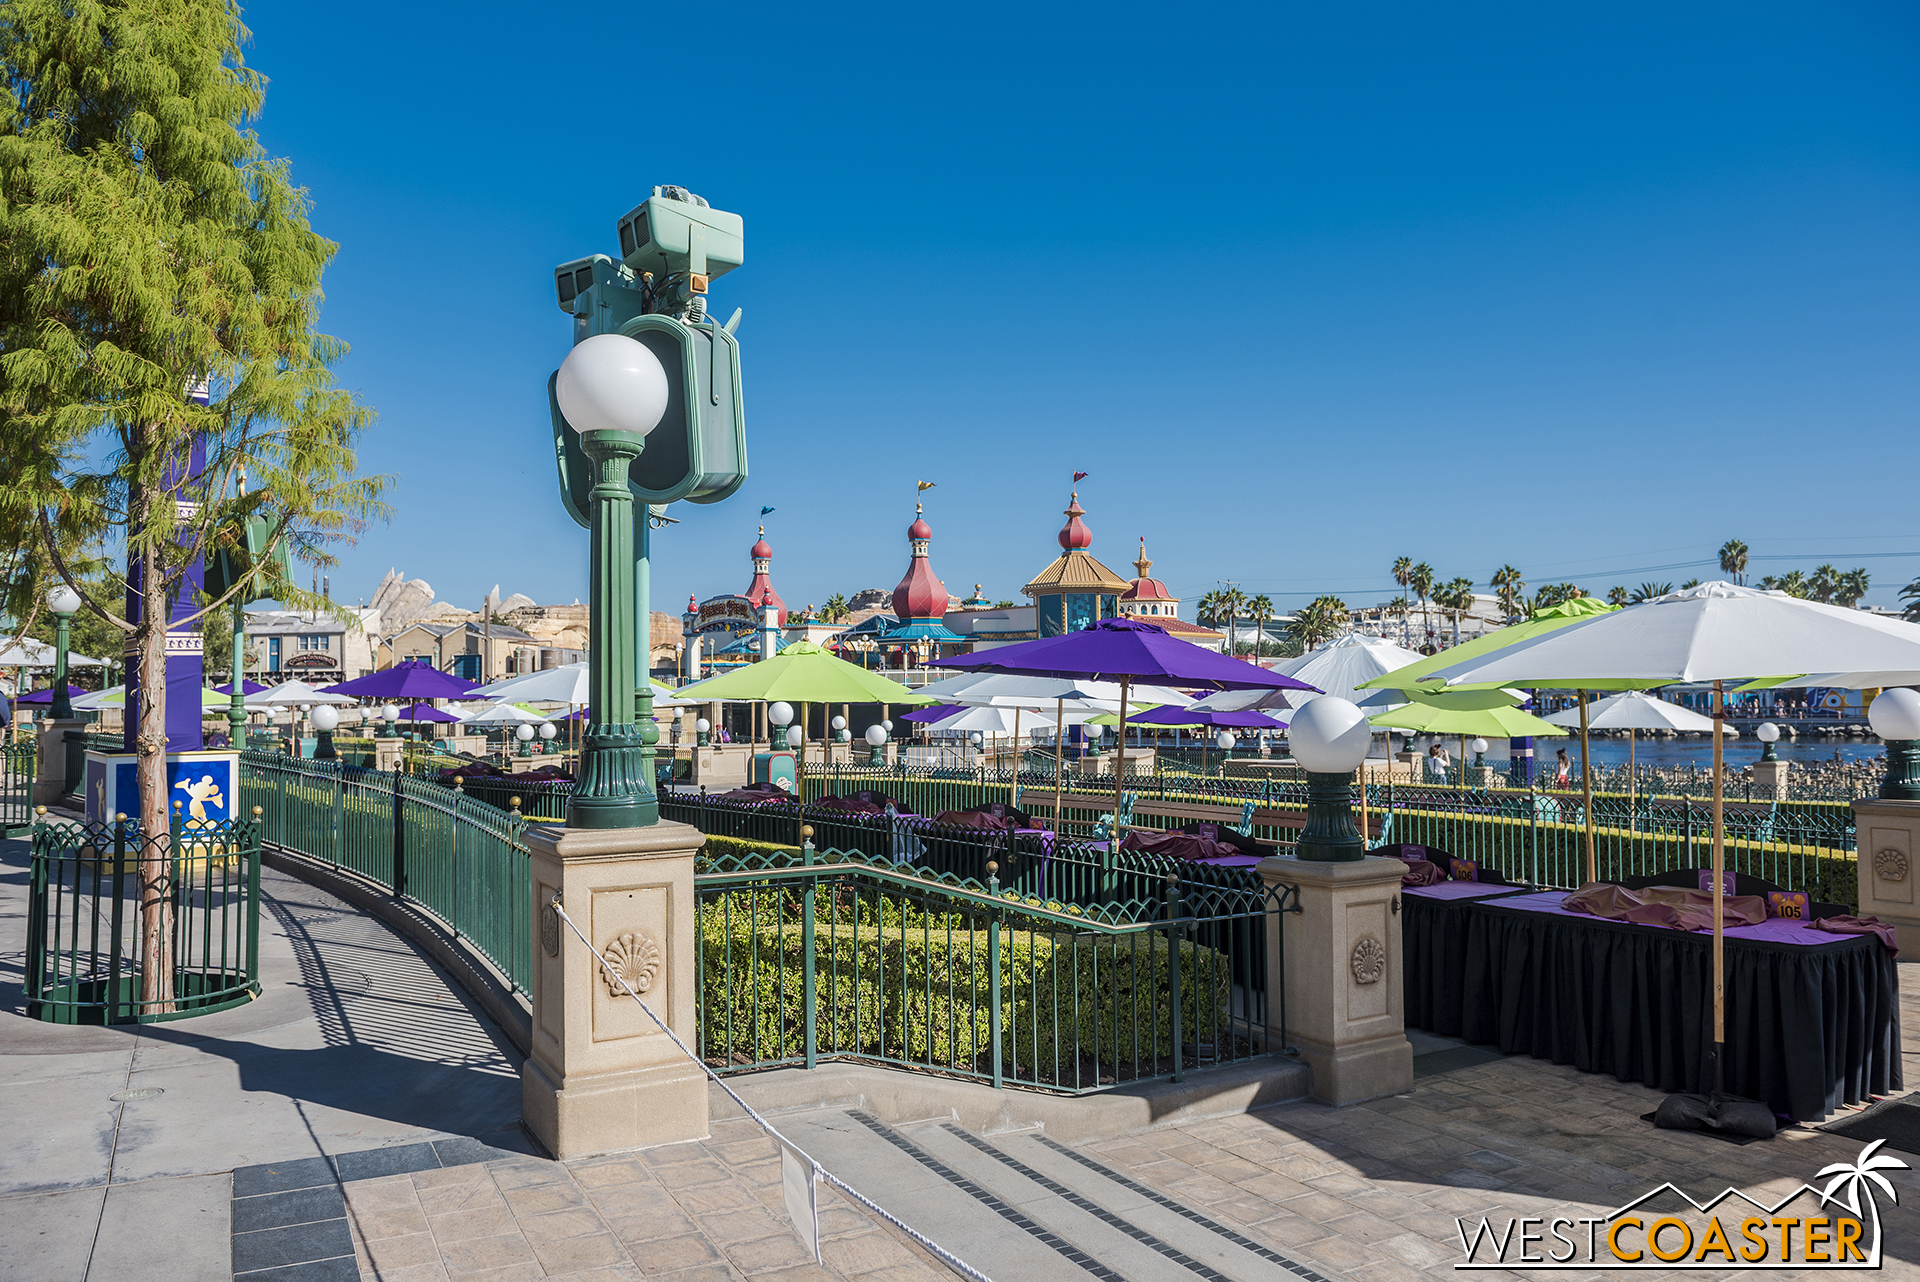  A bunch of booths were set up along Paradise Park over the weekend.  Probably for a mass media promotion day that Disney occasionally has with local radio stations and news groups. 